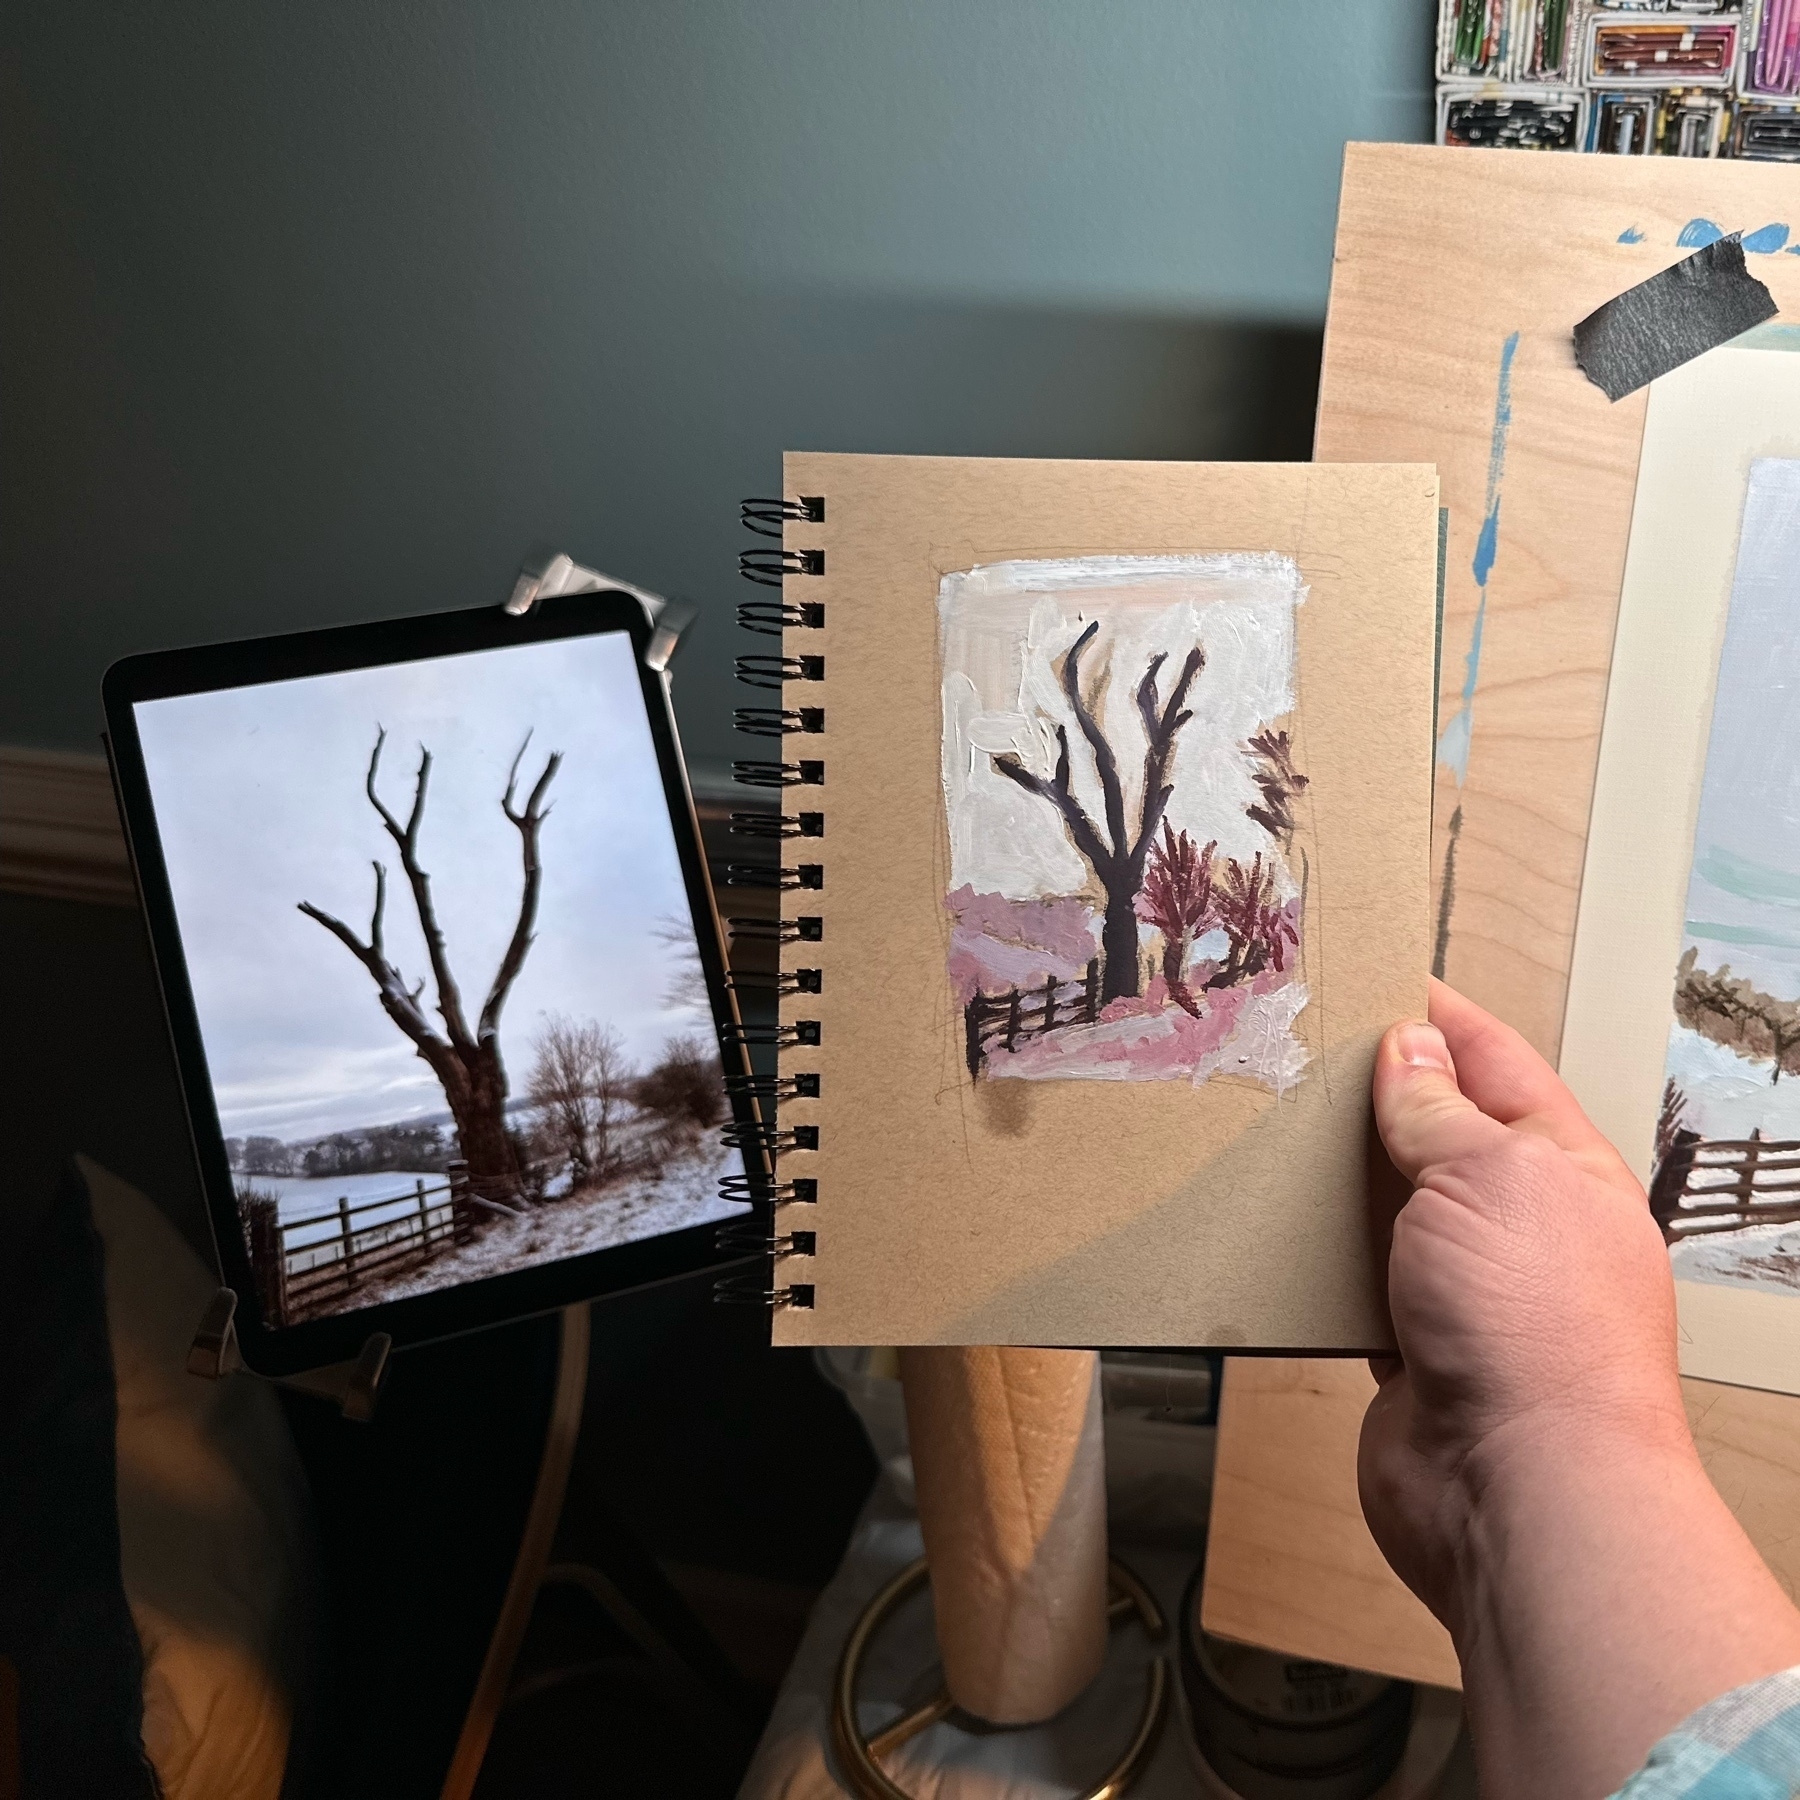 photo showing source image, sketch, and final painting of tree in snowy landscape